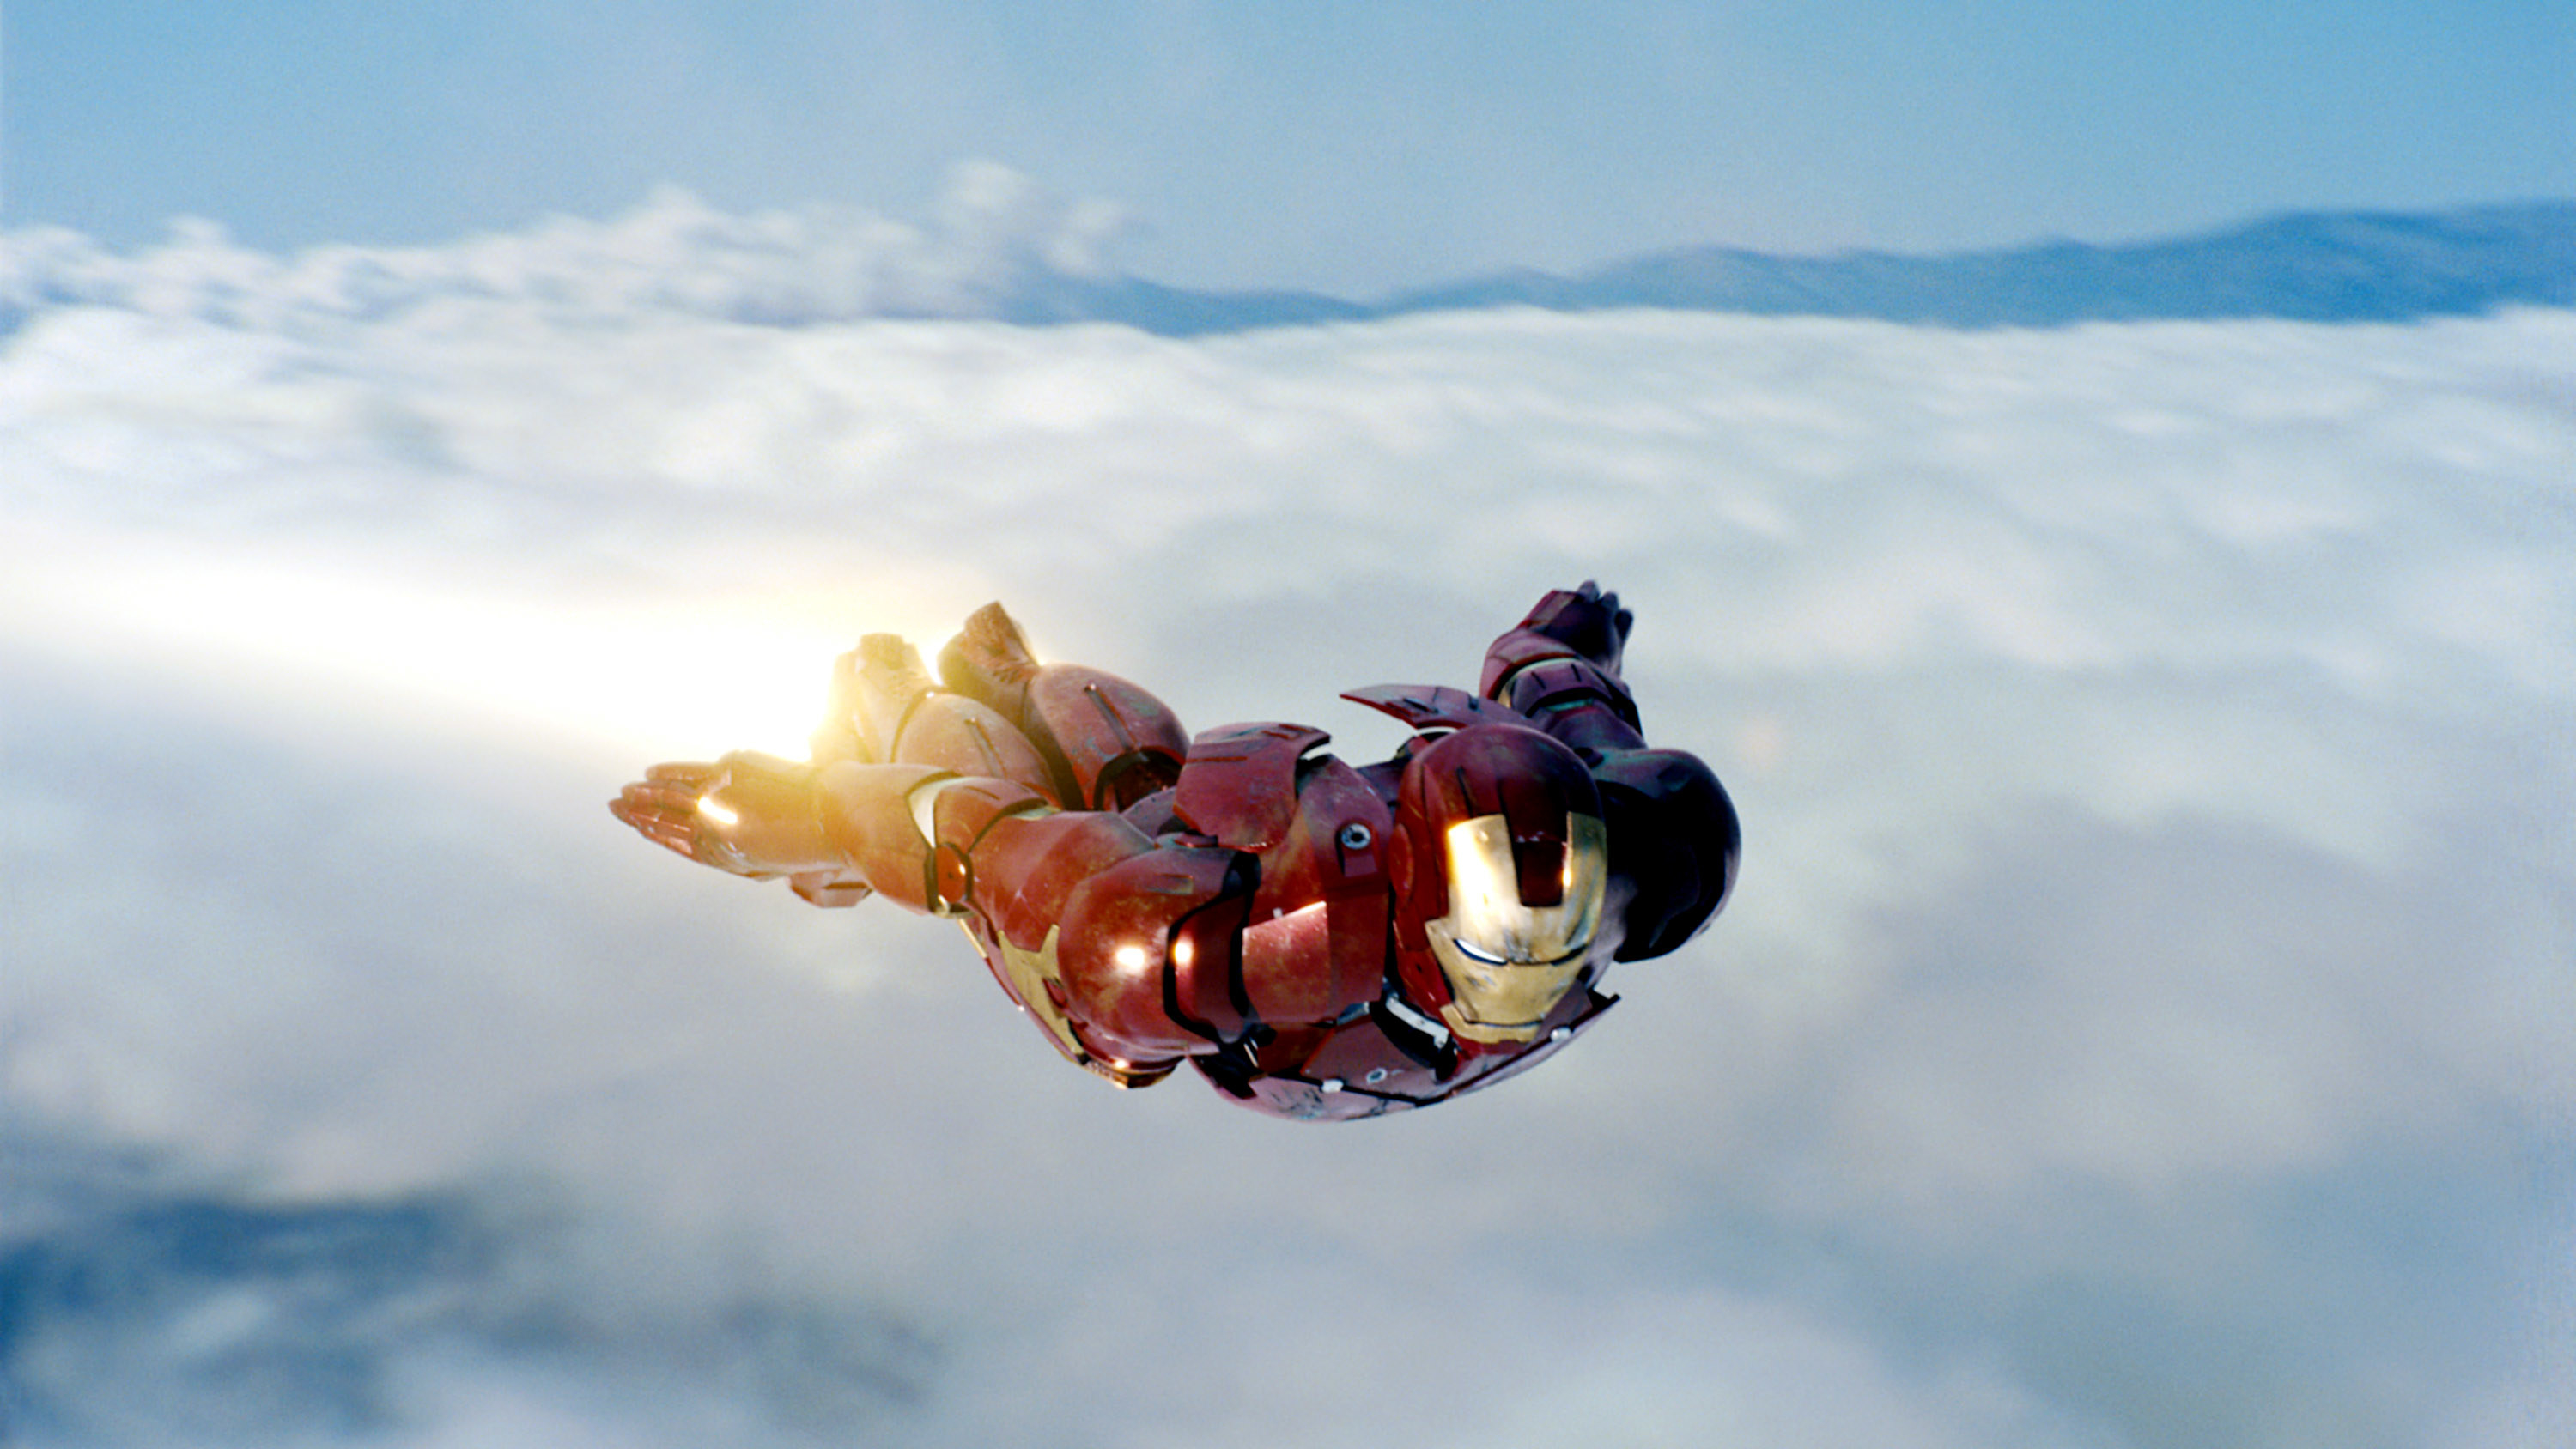 Iron Man flying above the clouds